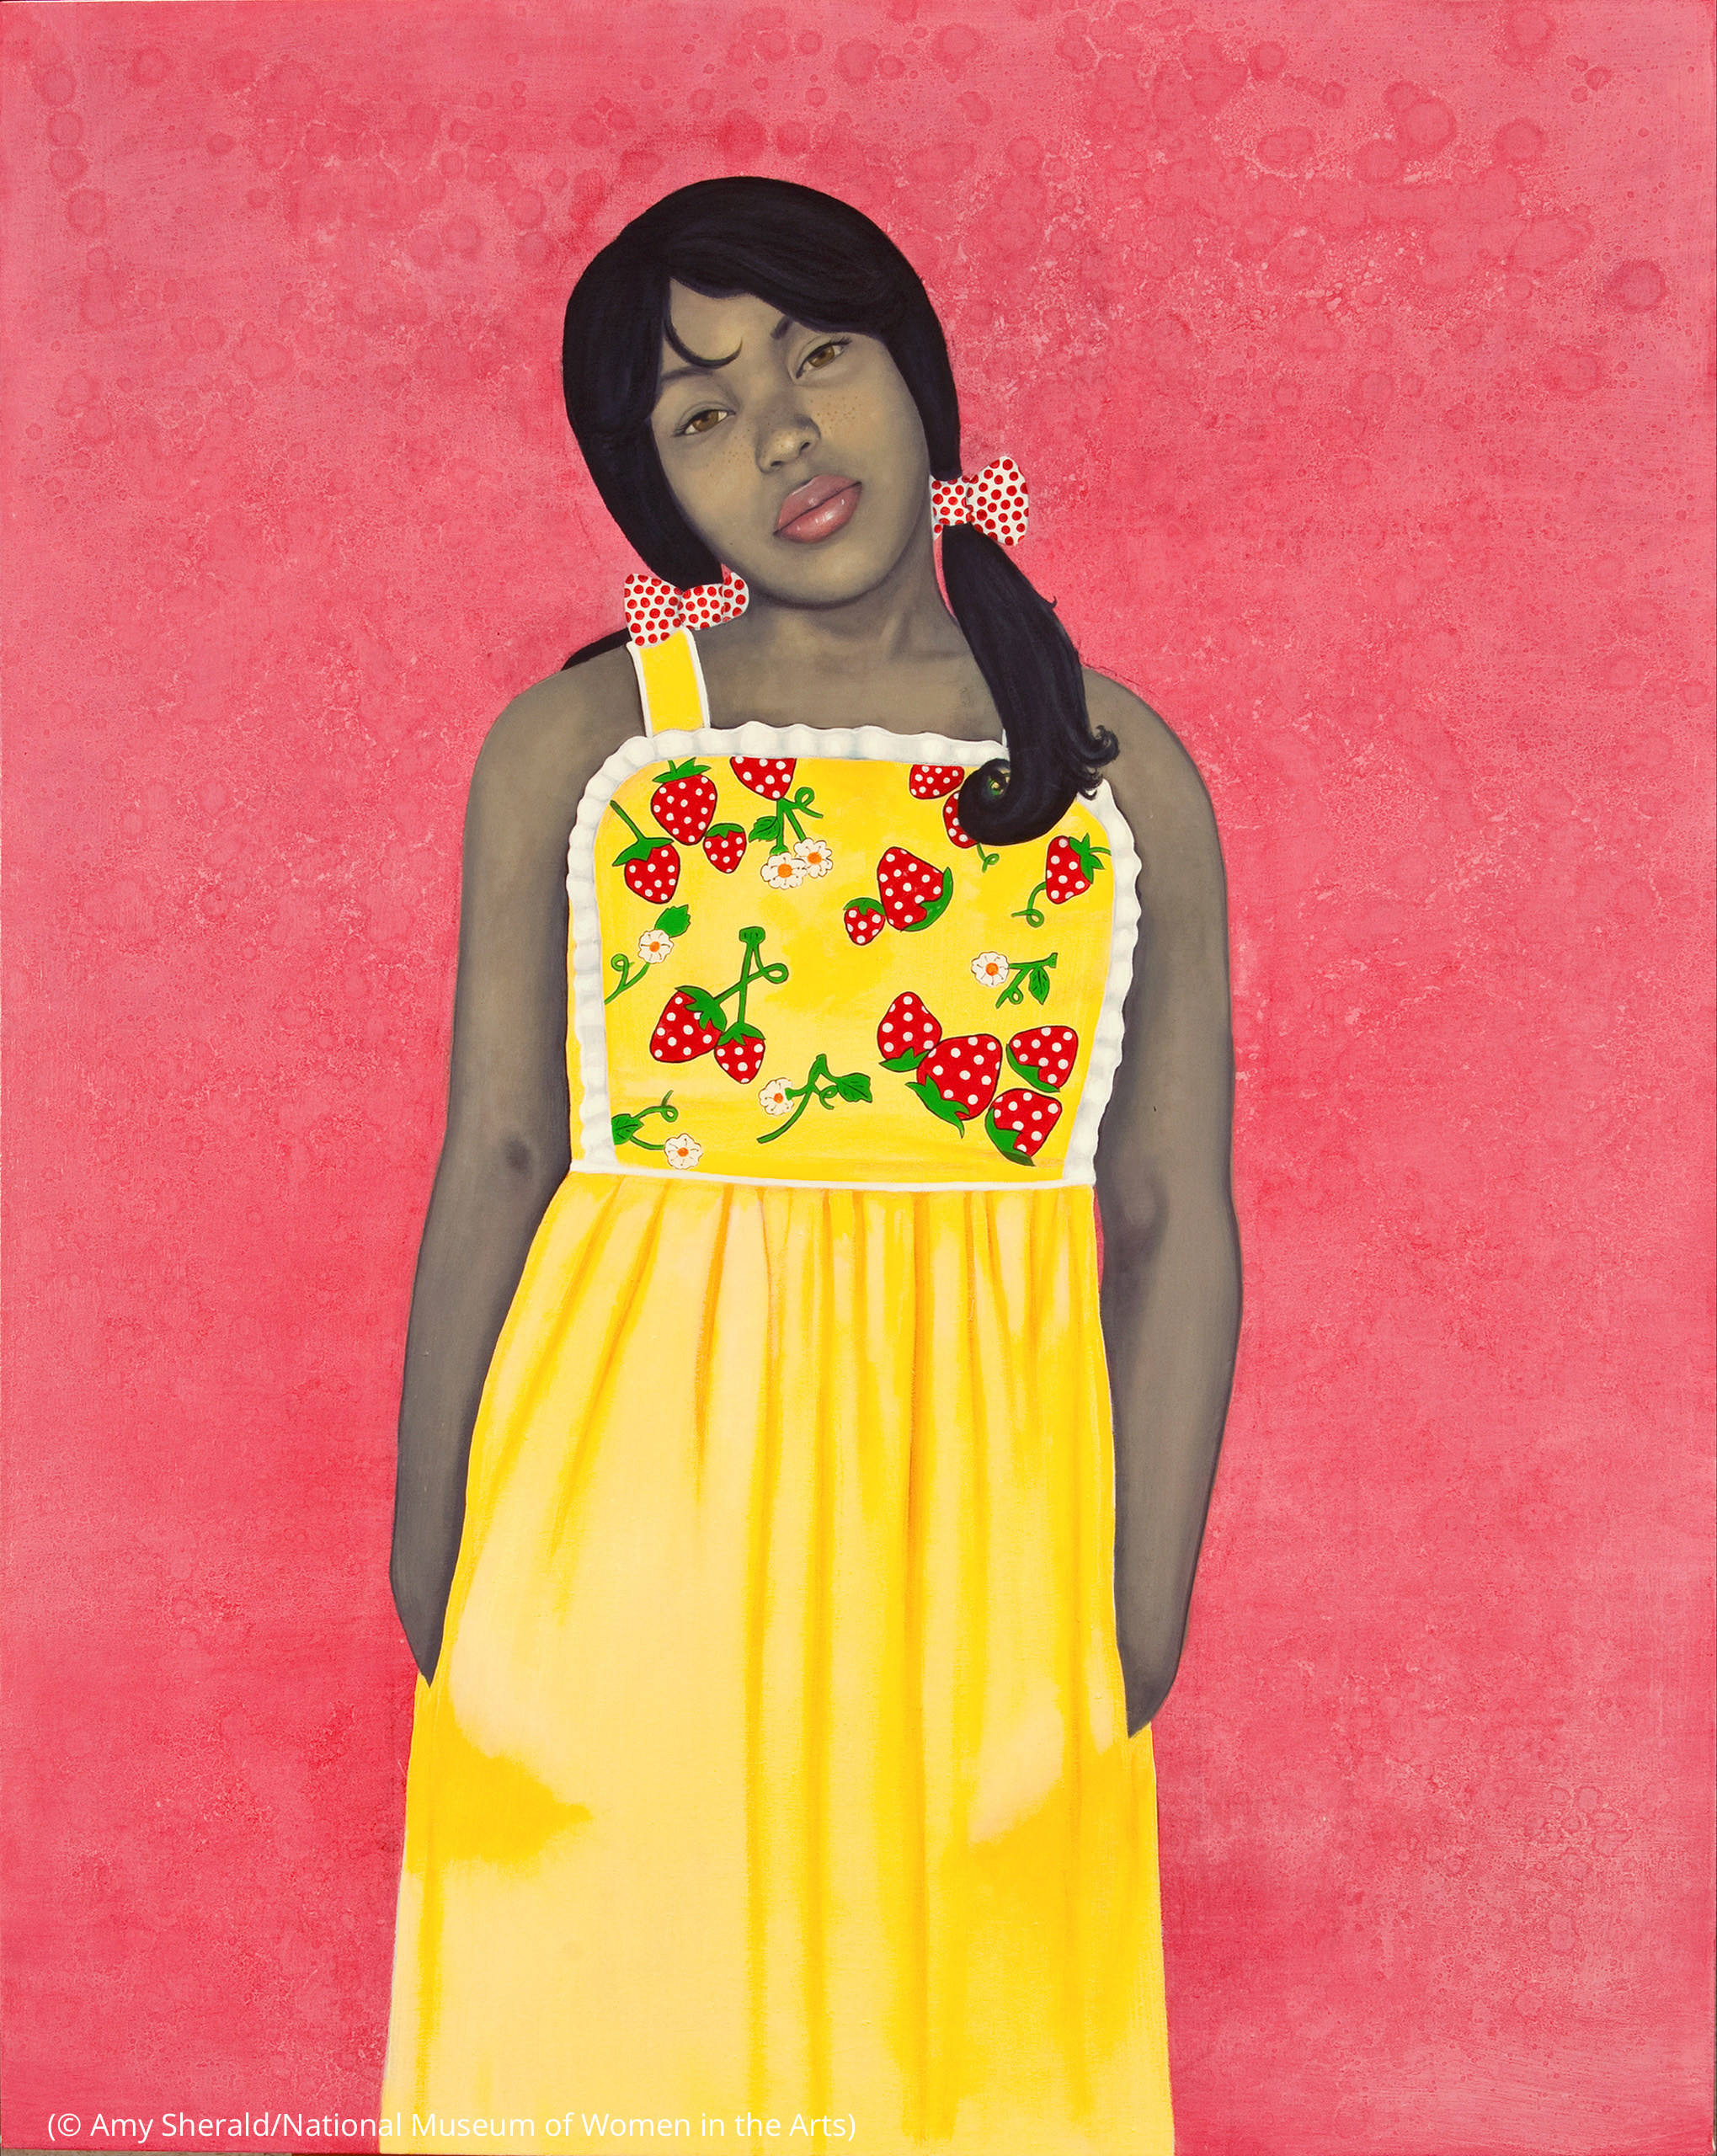 Painting of young woman in yellow sundress with strawberry decorations on its top with red background (© Amy Sherald/National Museum of Women in the Arts)